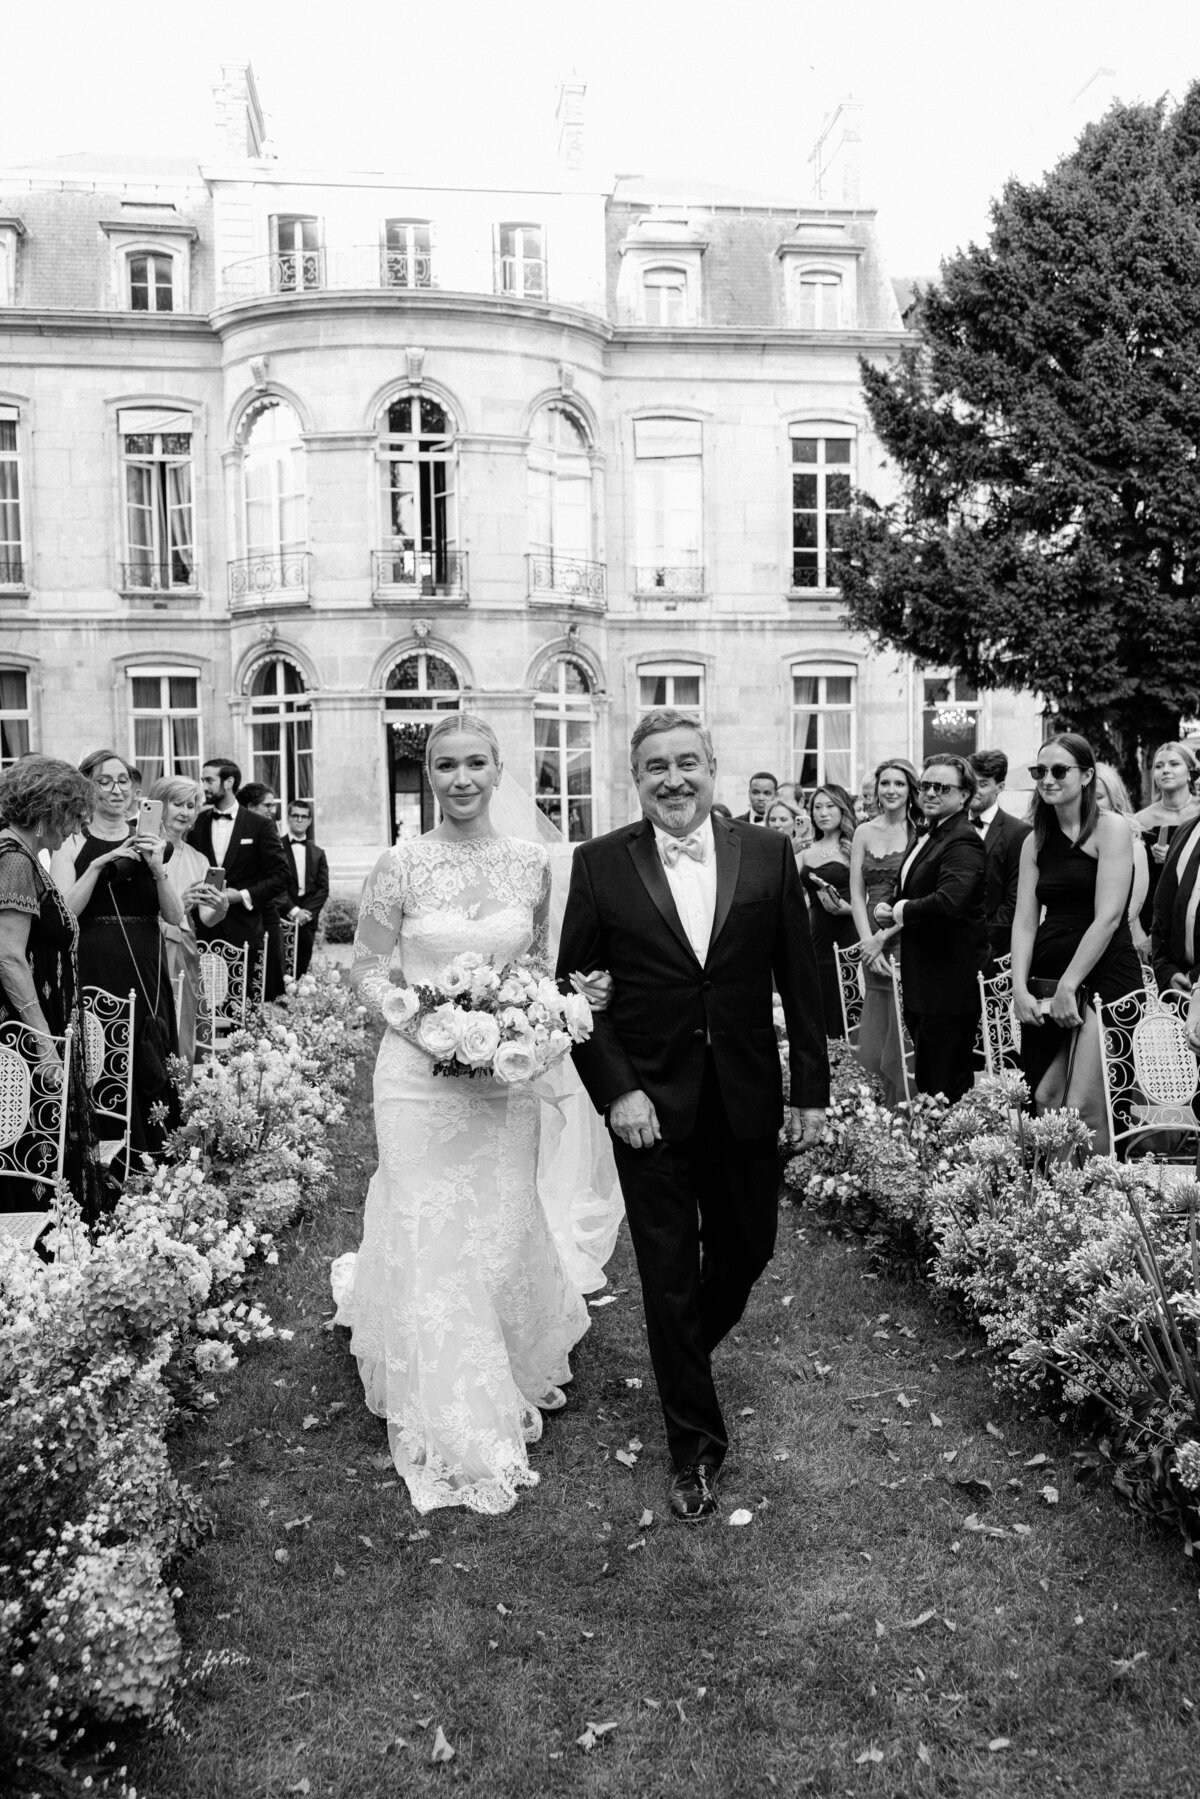 Jennifer Fox Weddings English speaking wedding planning & design agency in France crafting refined and bespoke weddings and celebrations Provence, Paris and destination wd515